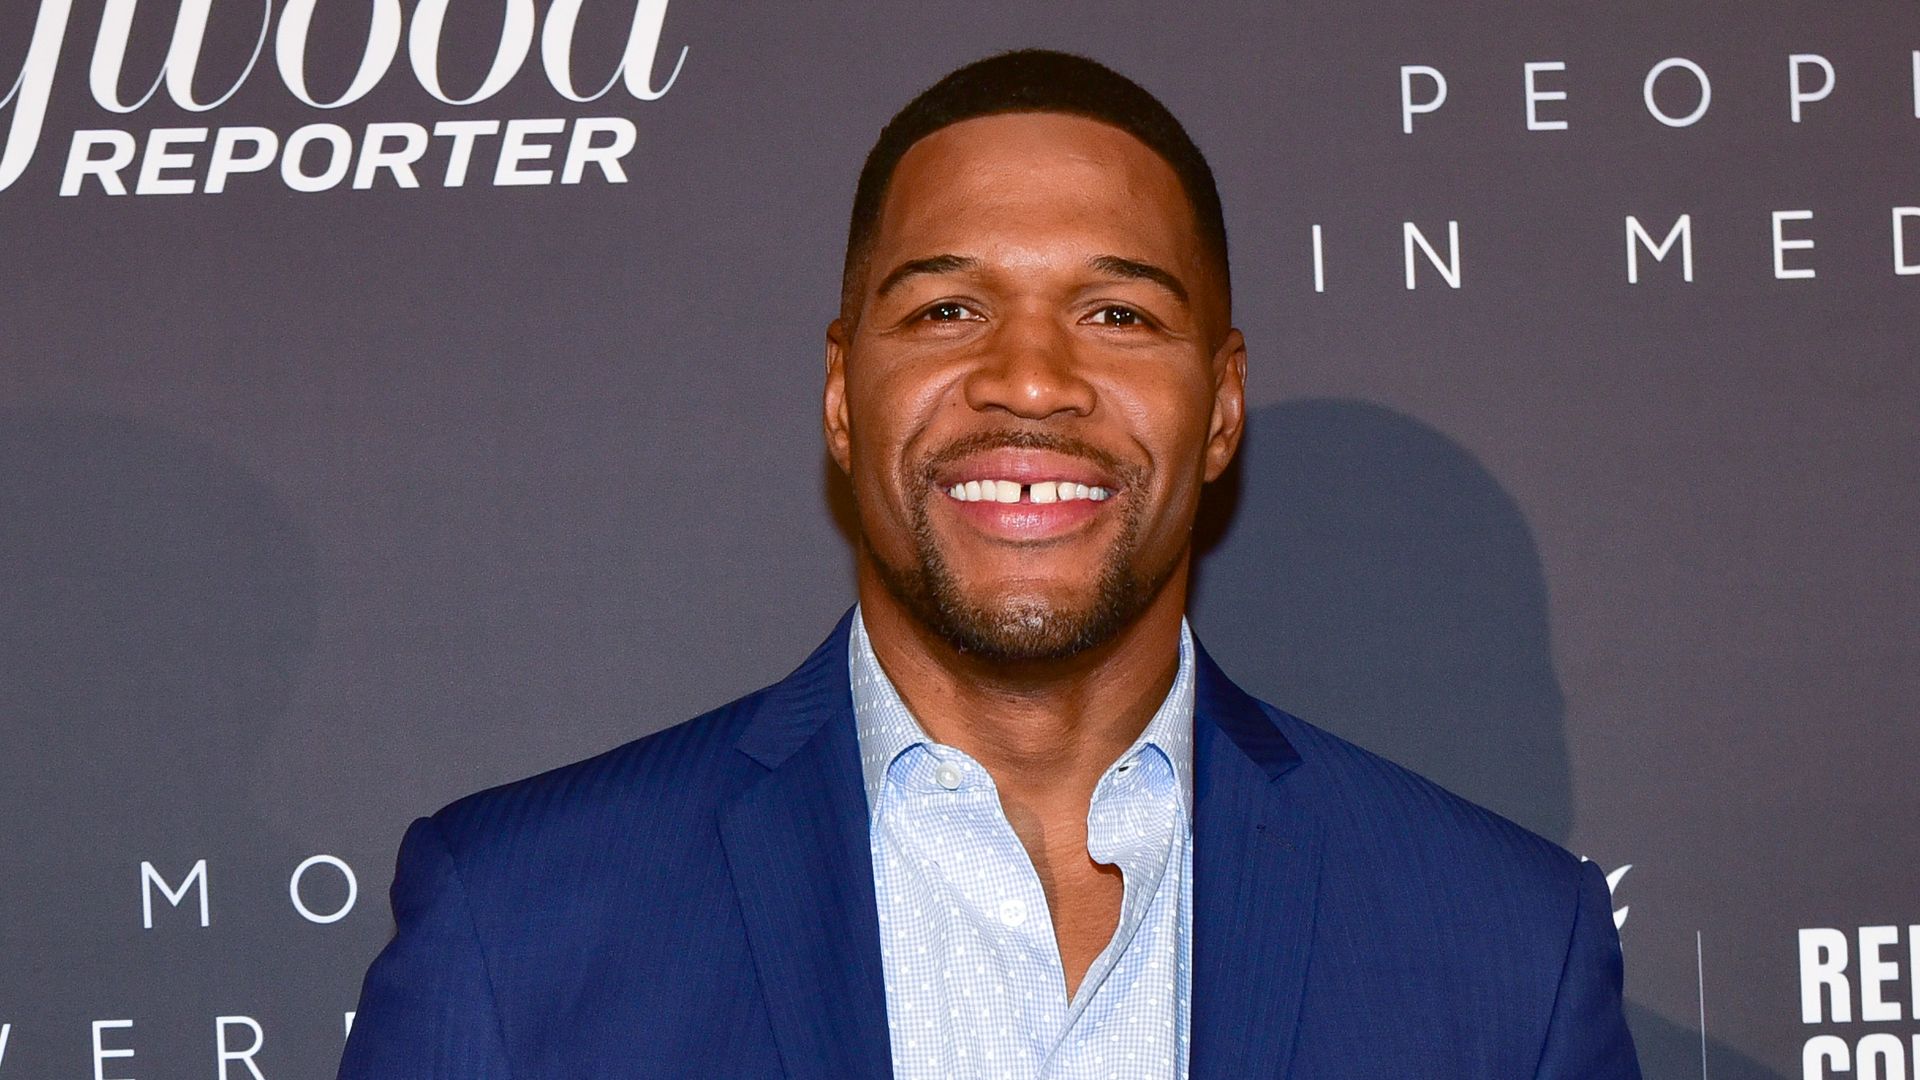 GMA's Michael Strahan shares photos showing unexpected family